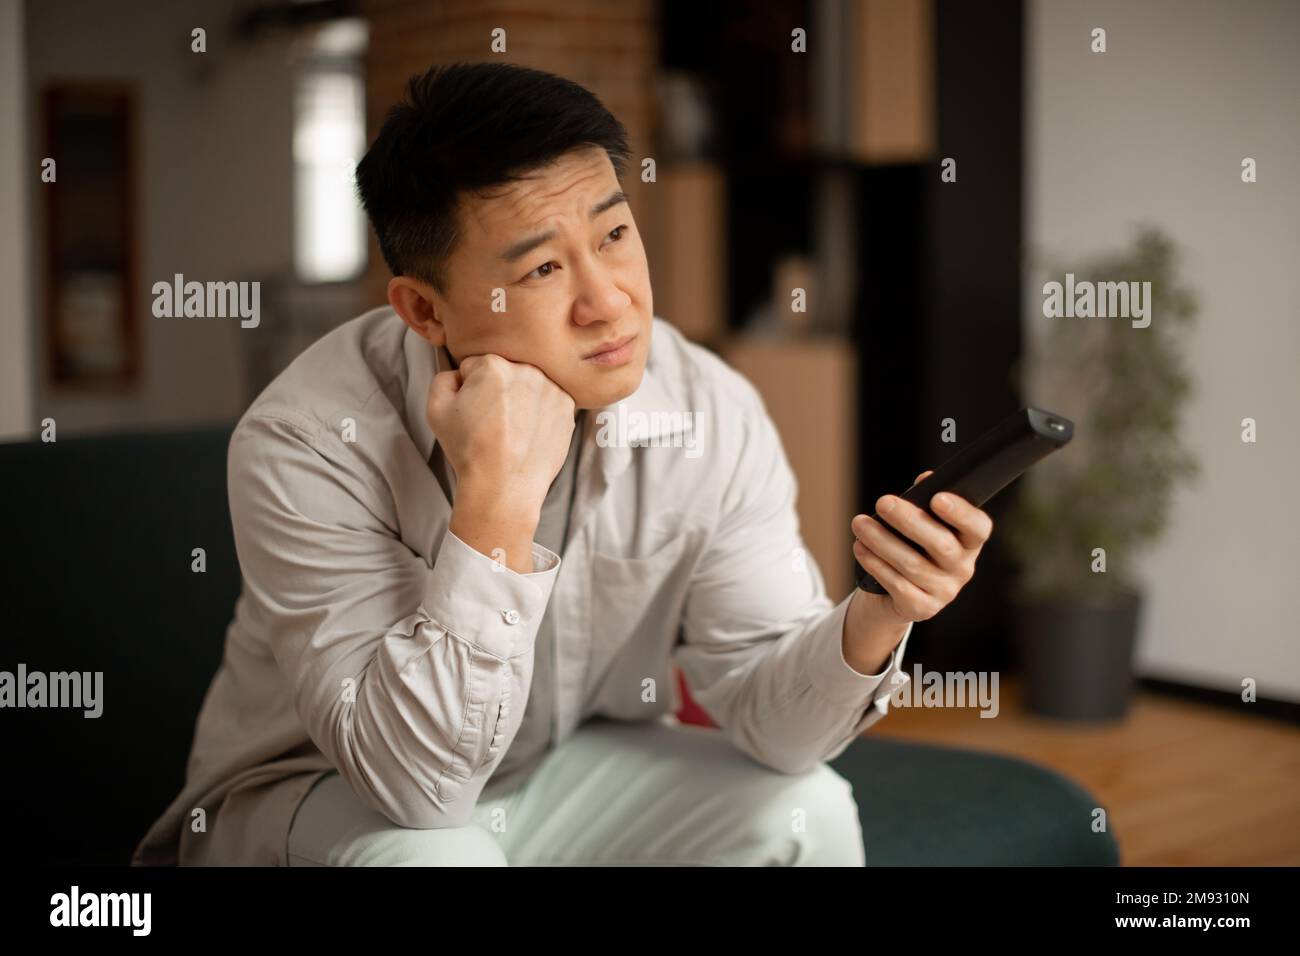 Boring television program concept. Bored mature japanese man watching TV, switching channels with remote control Stock Photo